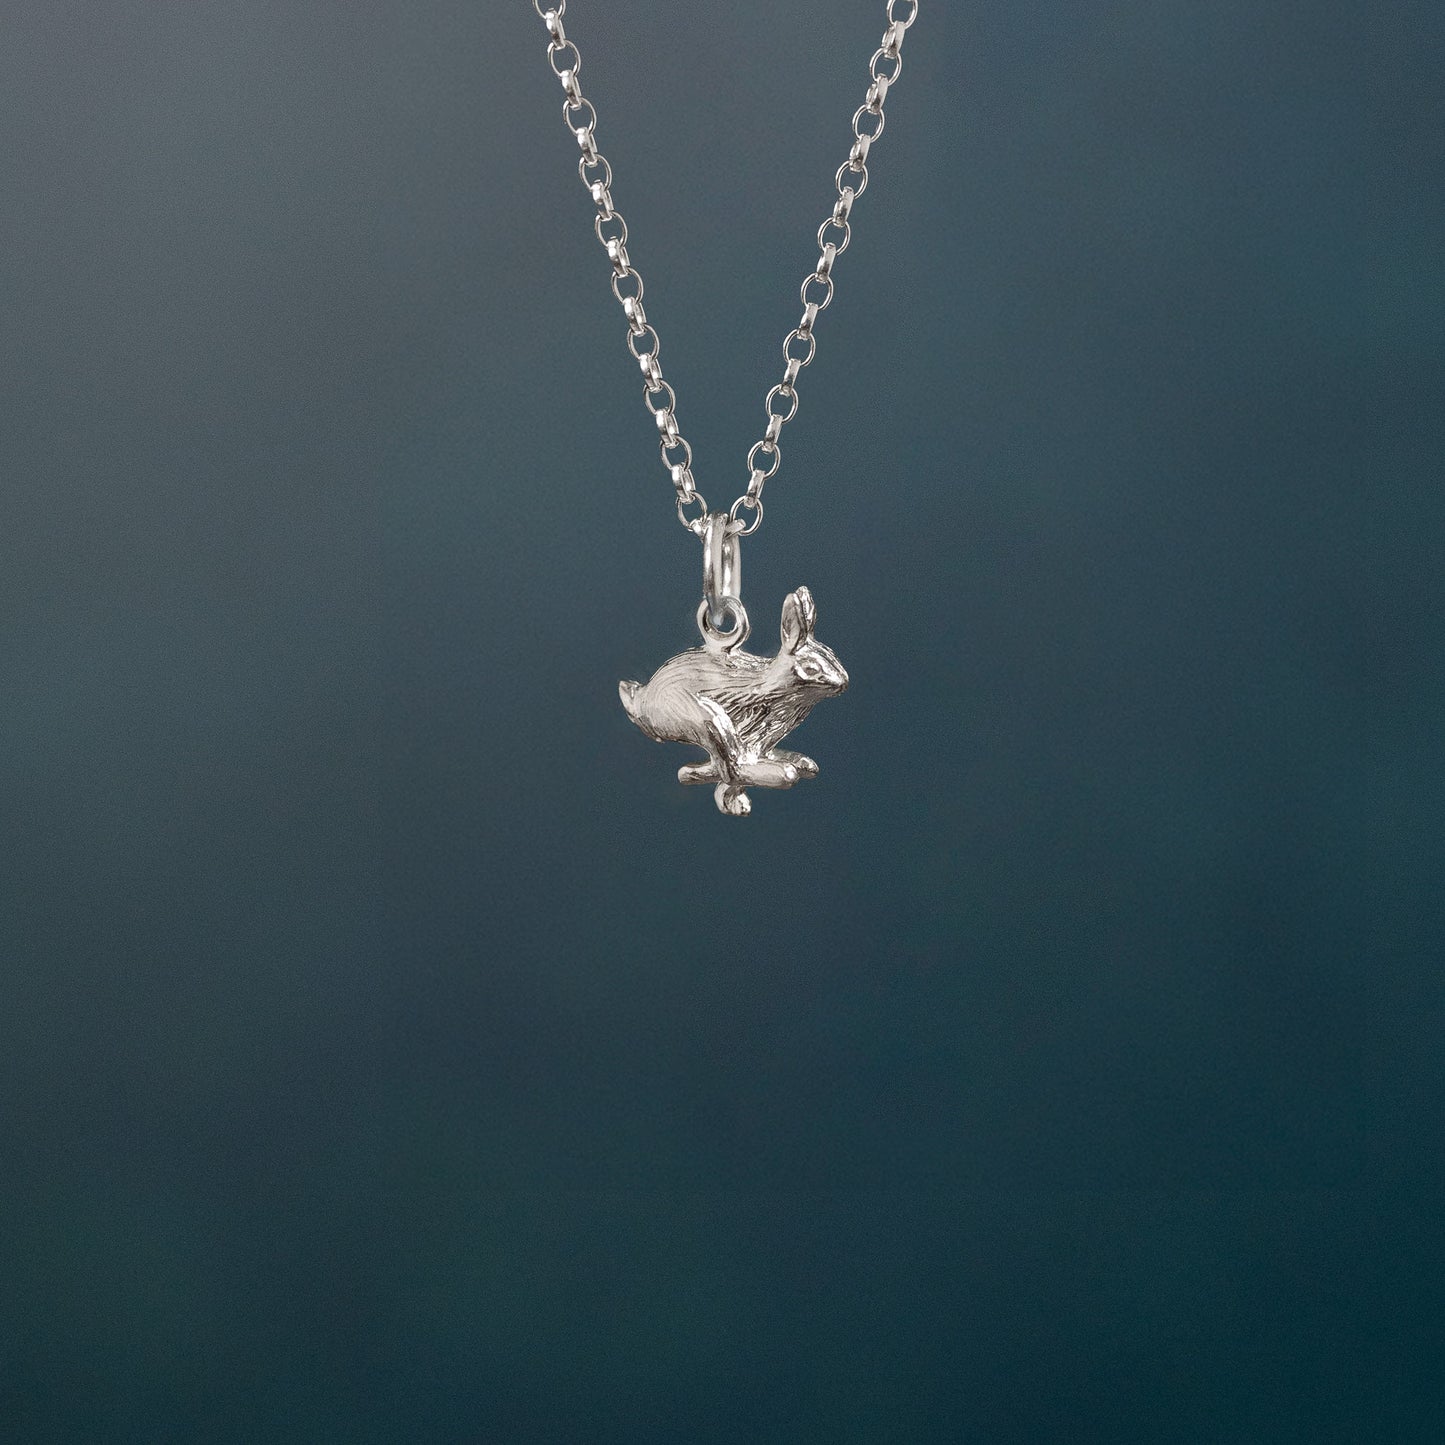 Small Silver Running Hare Charm Necklace